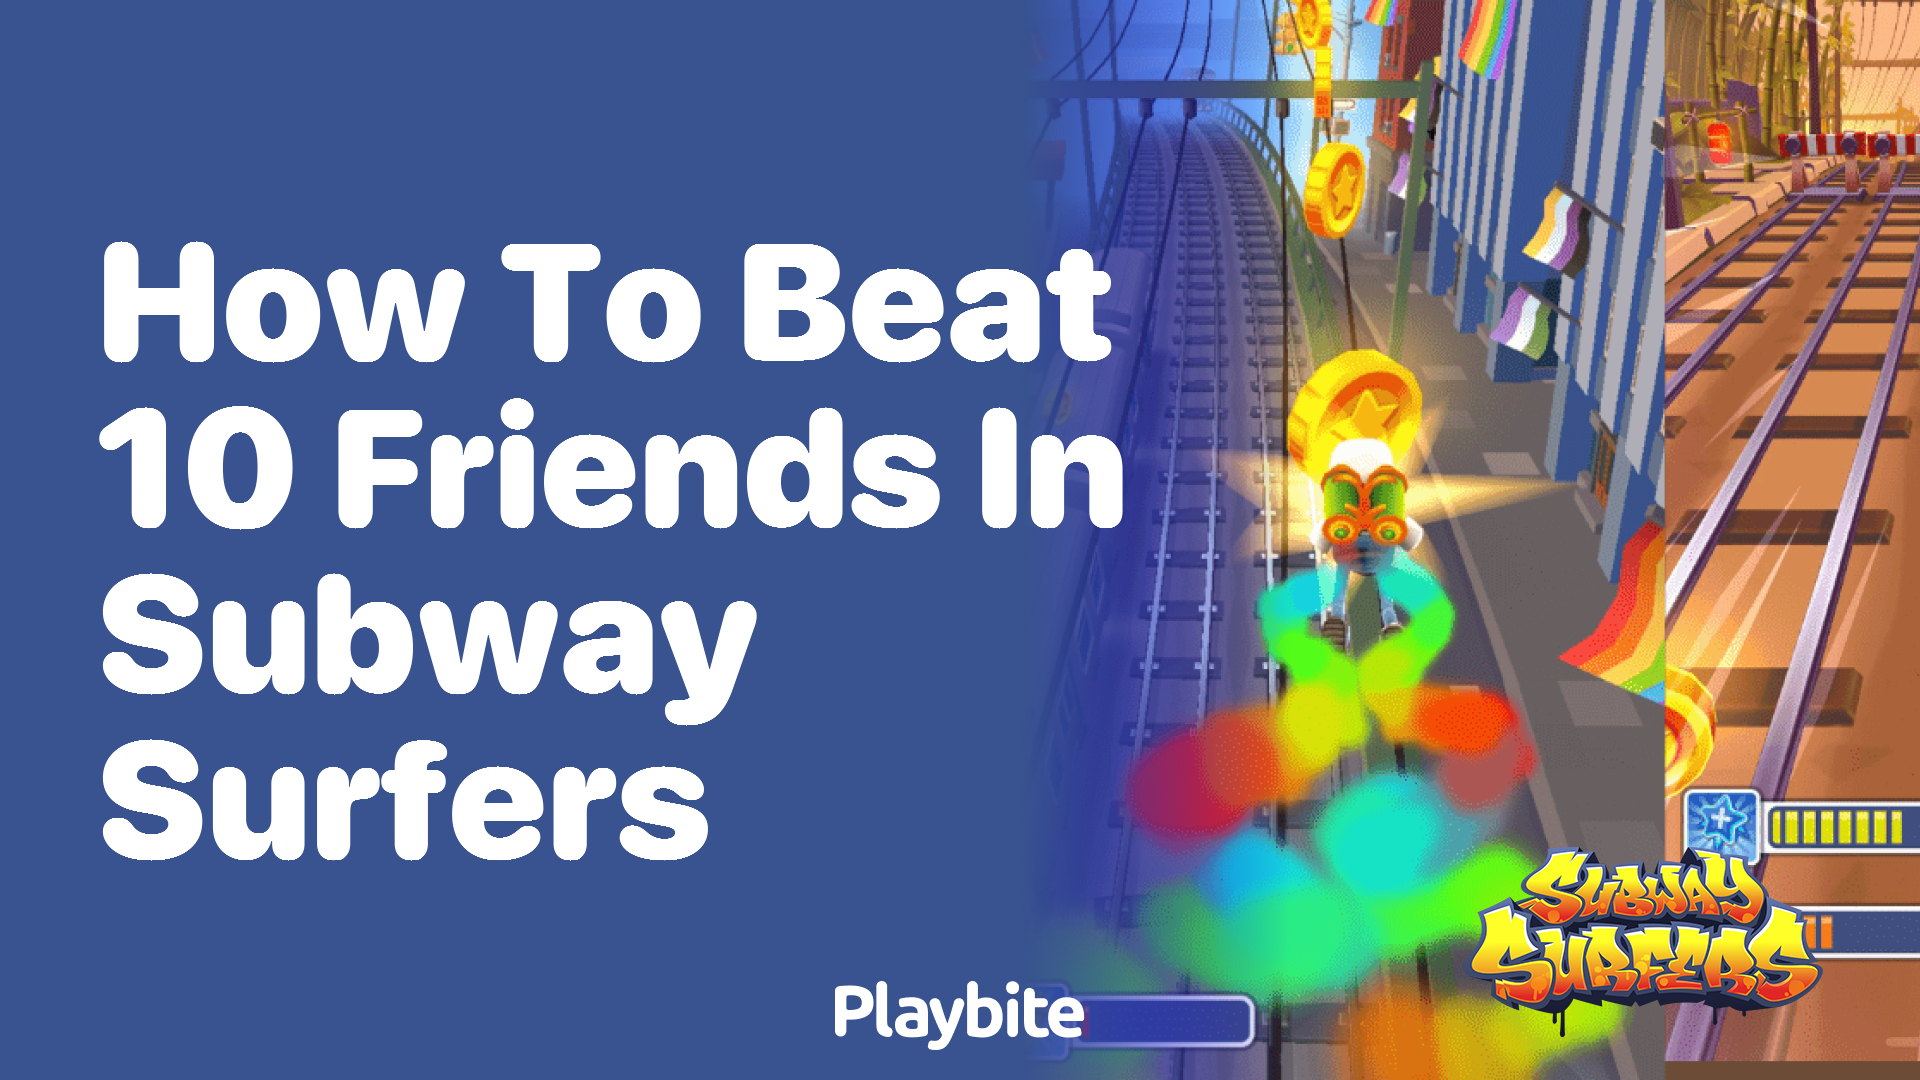 How to Beat 10 Friends in Subway Surfers